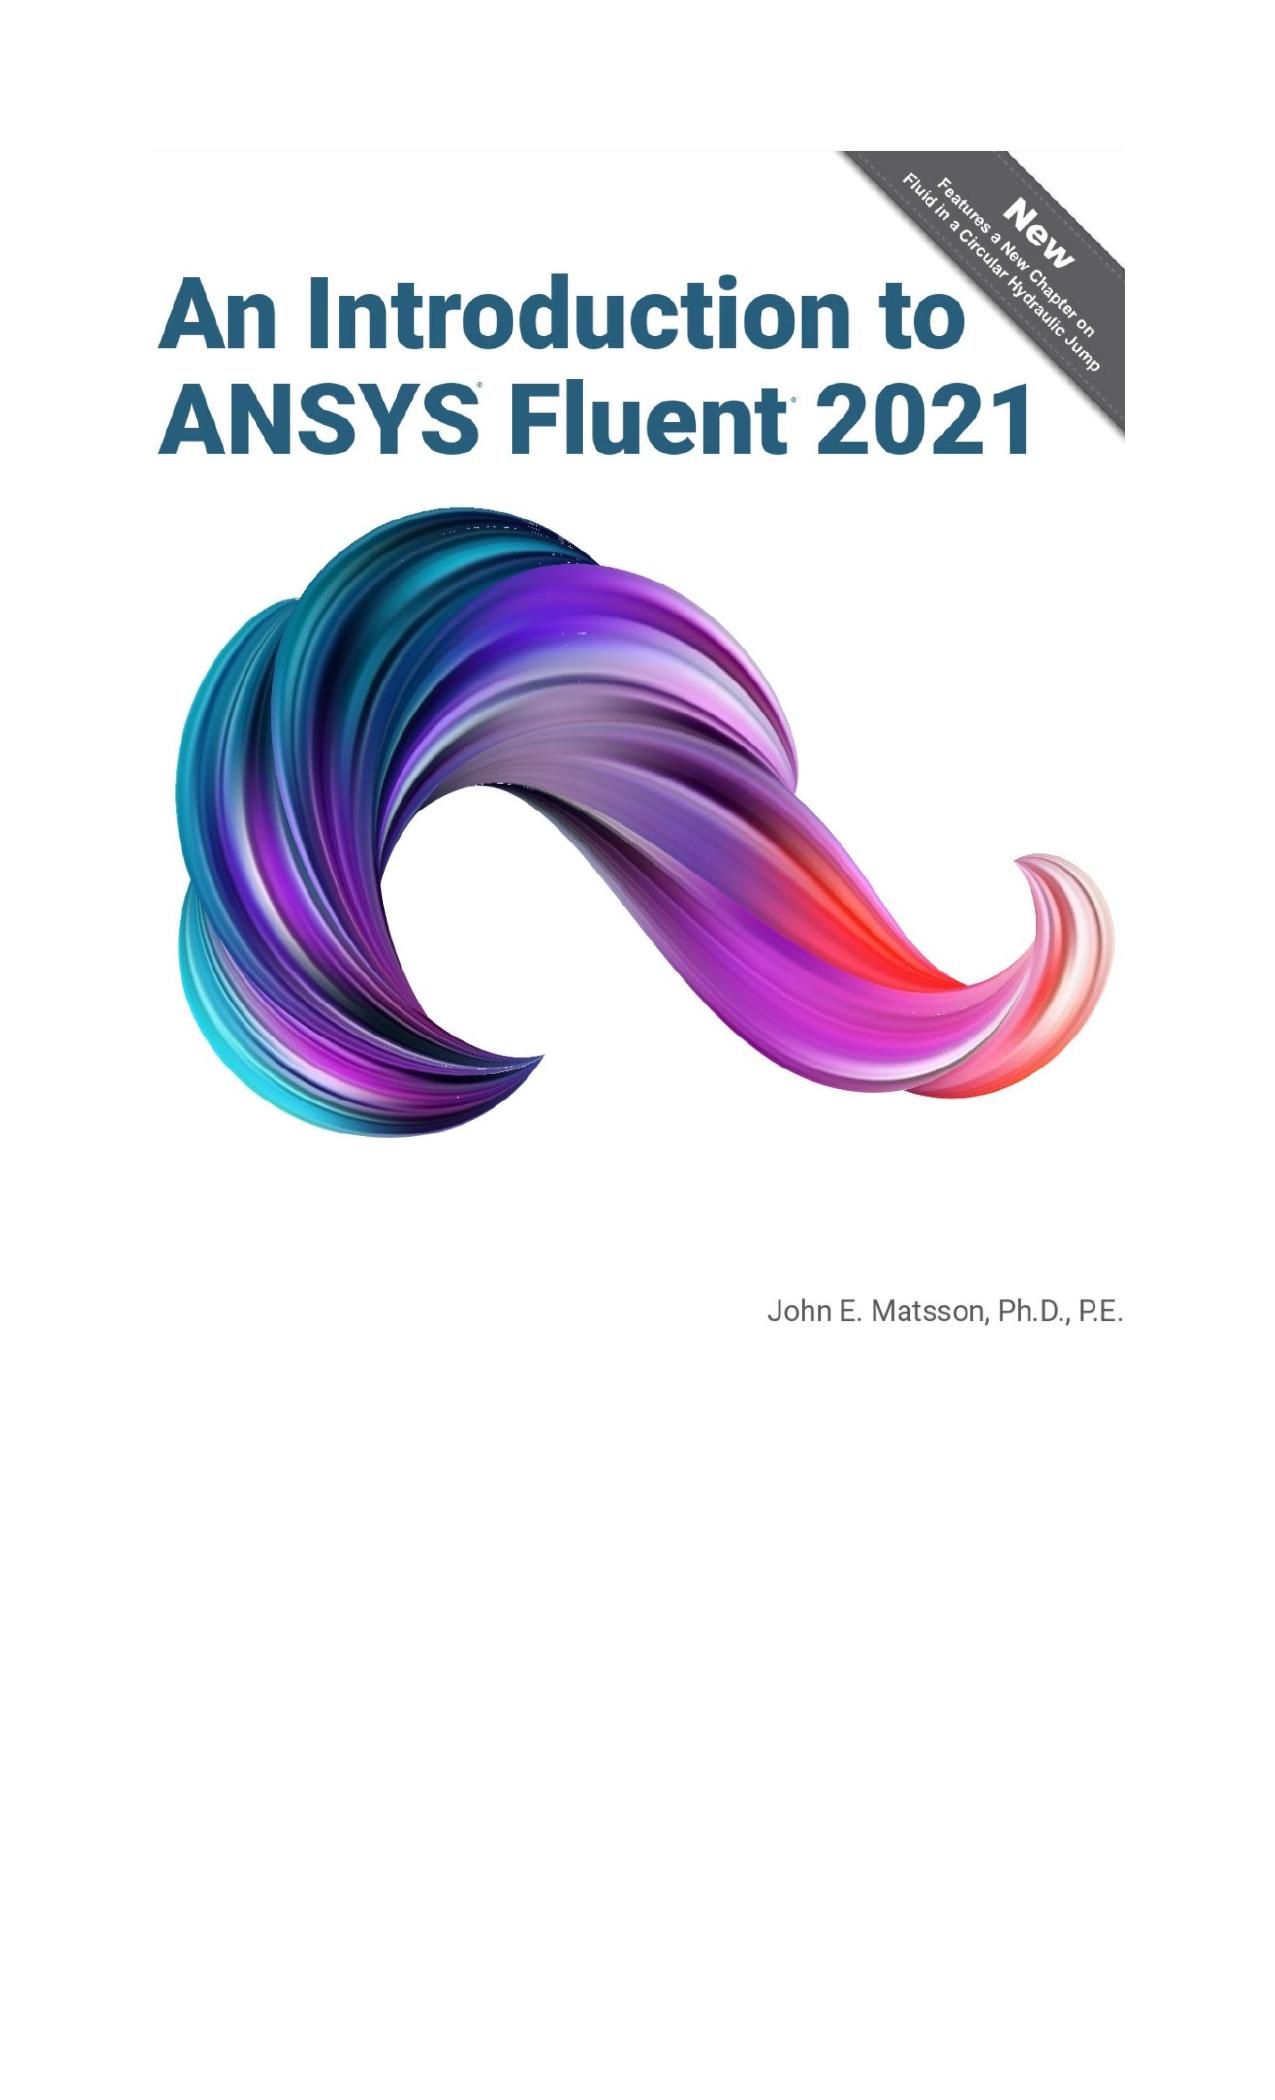 An Introduction to ANSYS Fluent 2021